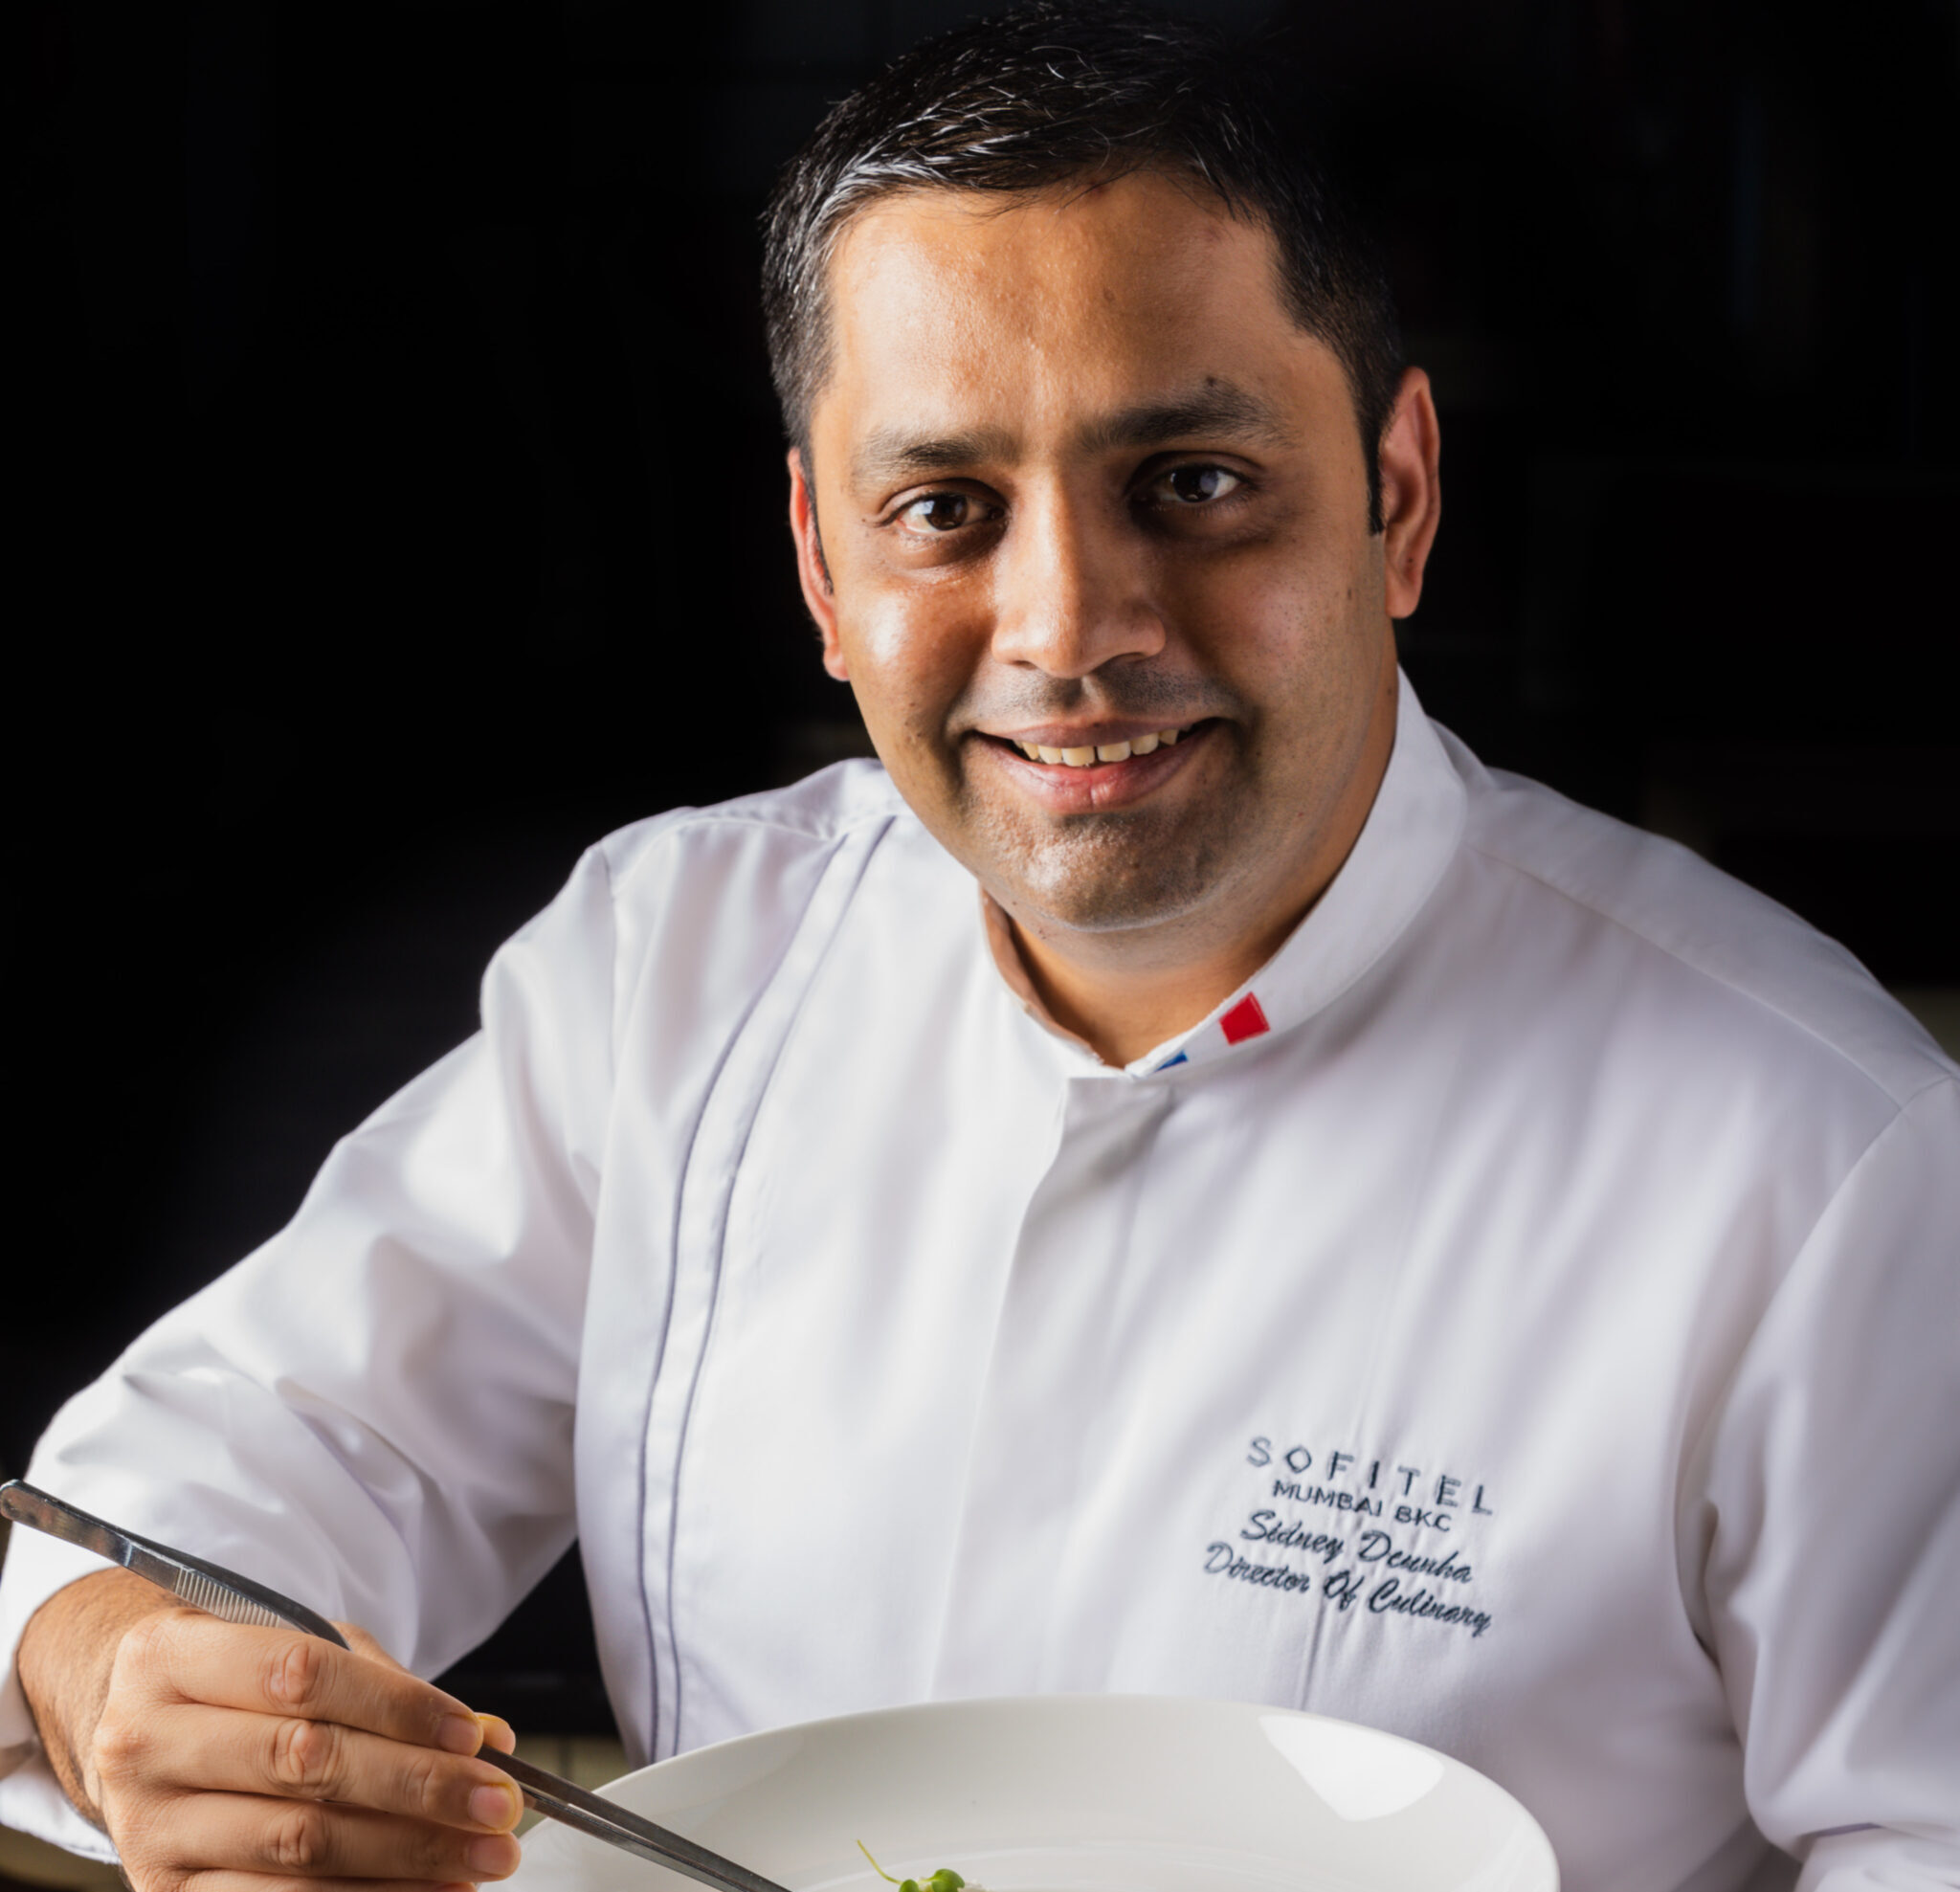 Sofitel Mumbai BKC Appoints Sidney Dcunha as Culinary Director